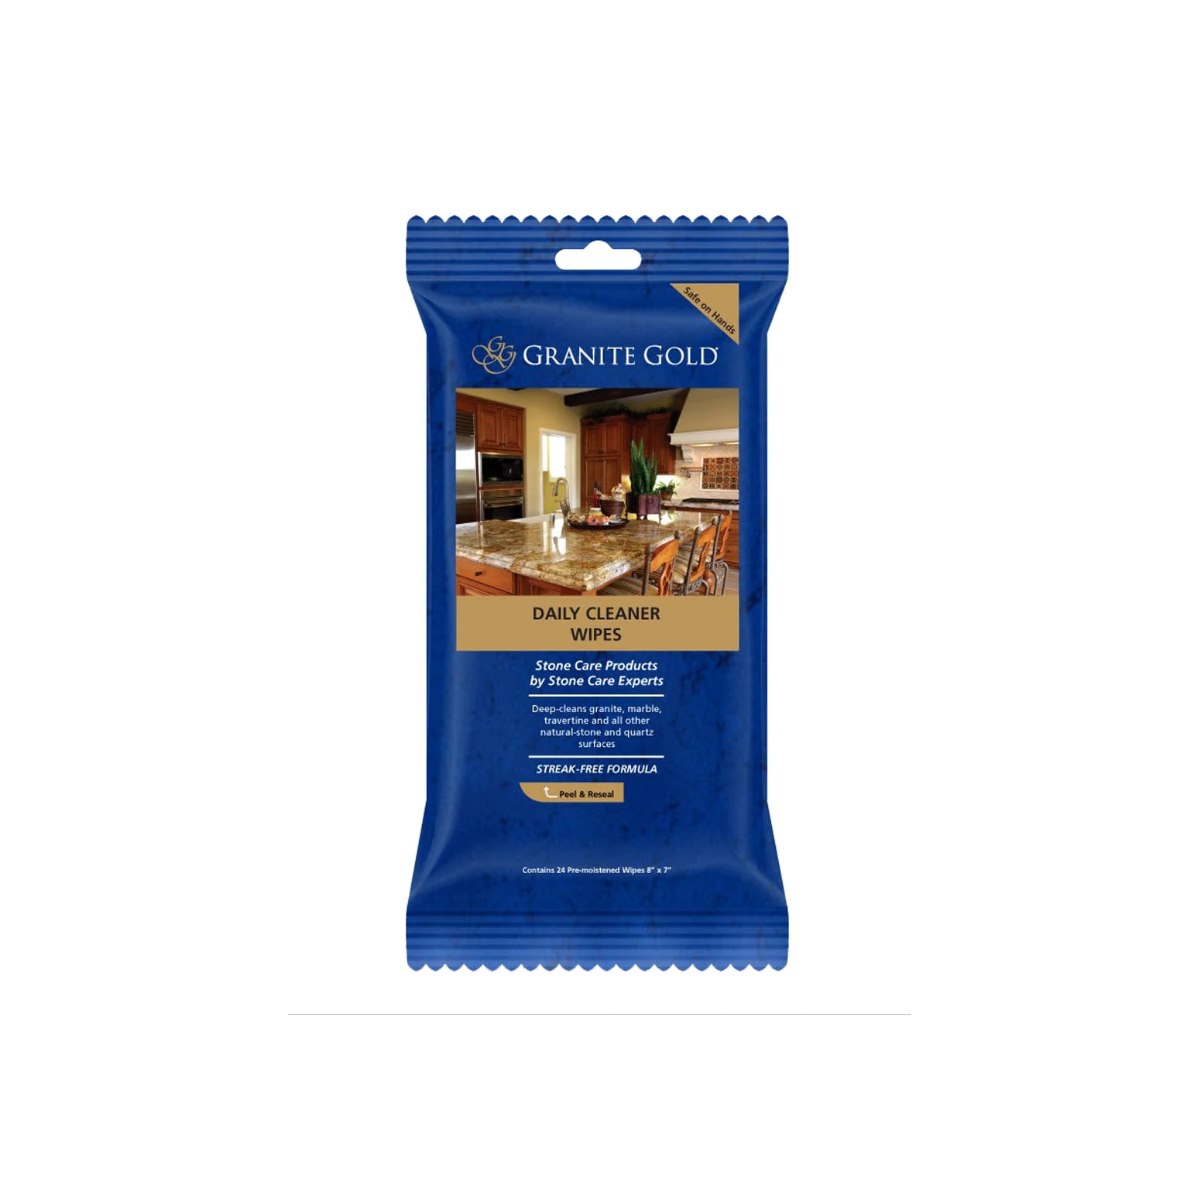 Granite Gold Daily Cleaner Wipes Pack of 24 Wipes